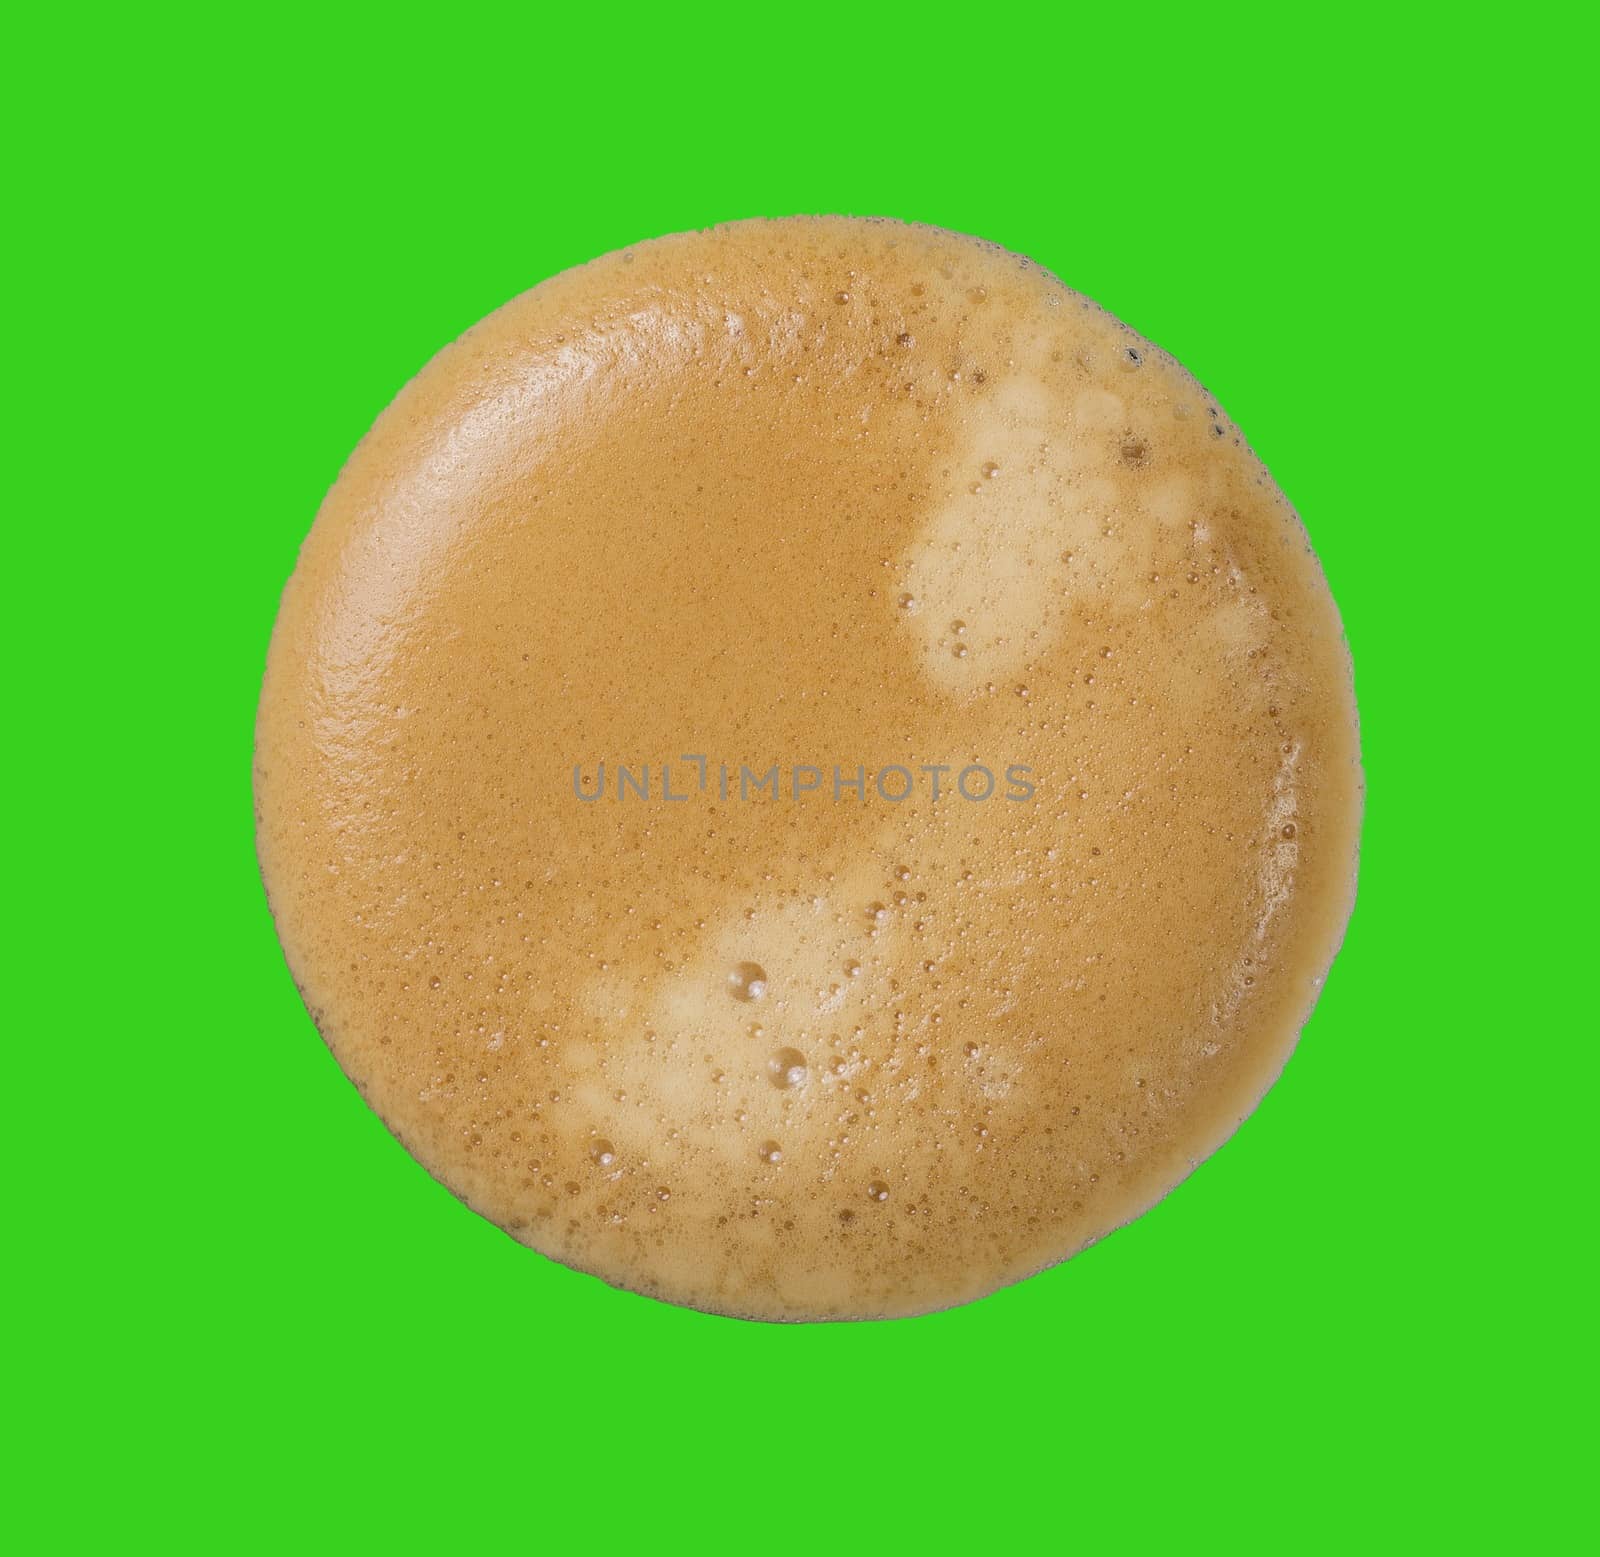 Top view of coffee cream with green background.